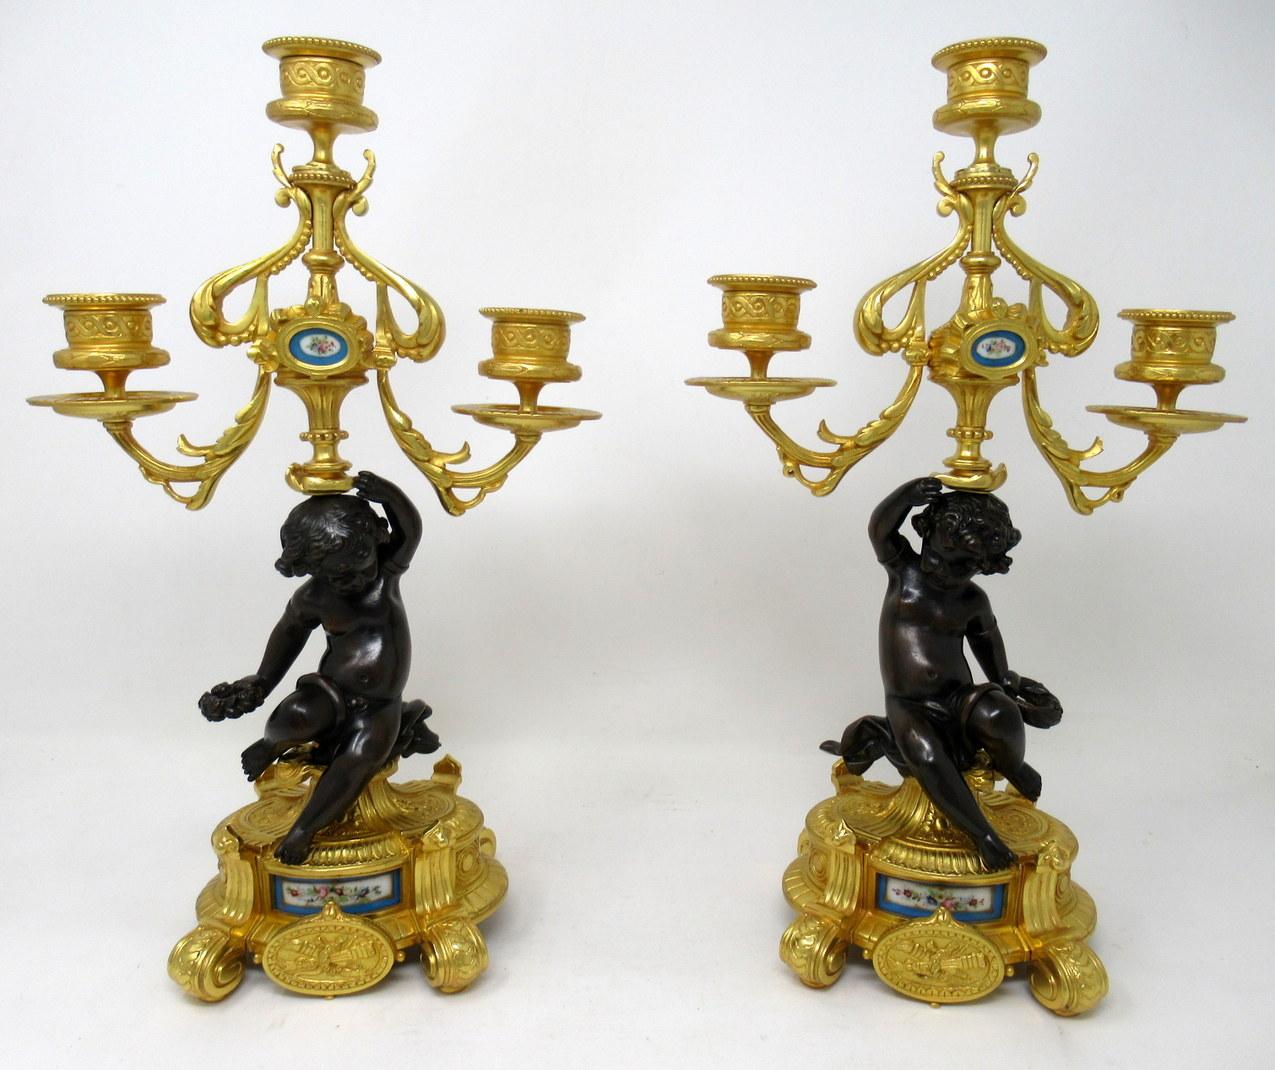 A fine pair of stylish and imposing French ormolu and patinated bronze three-light table or mantle candelabra of outstanding quality, mid-late 19th century. 

Each with a central seated patinated solid bronze Cherub holding a loft on one hand a